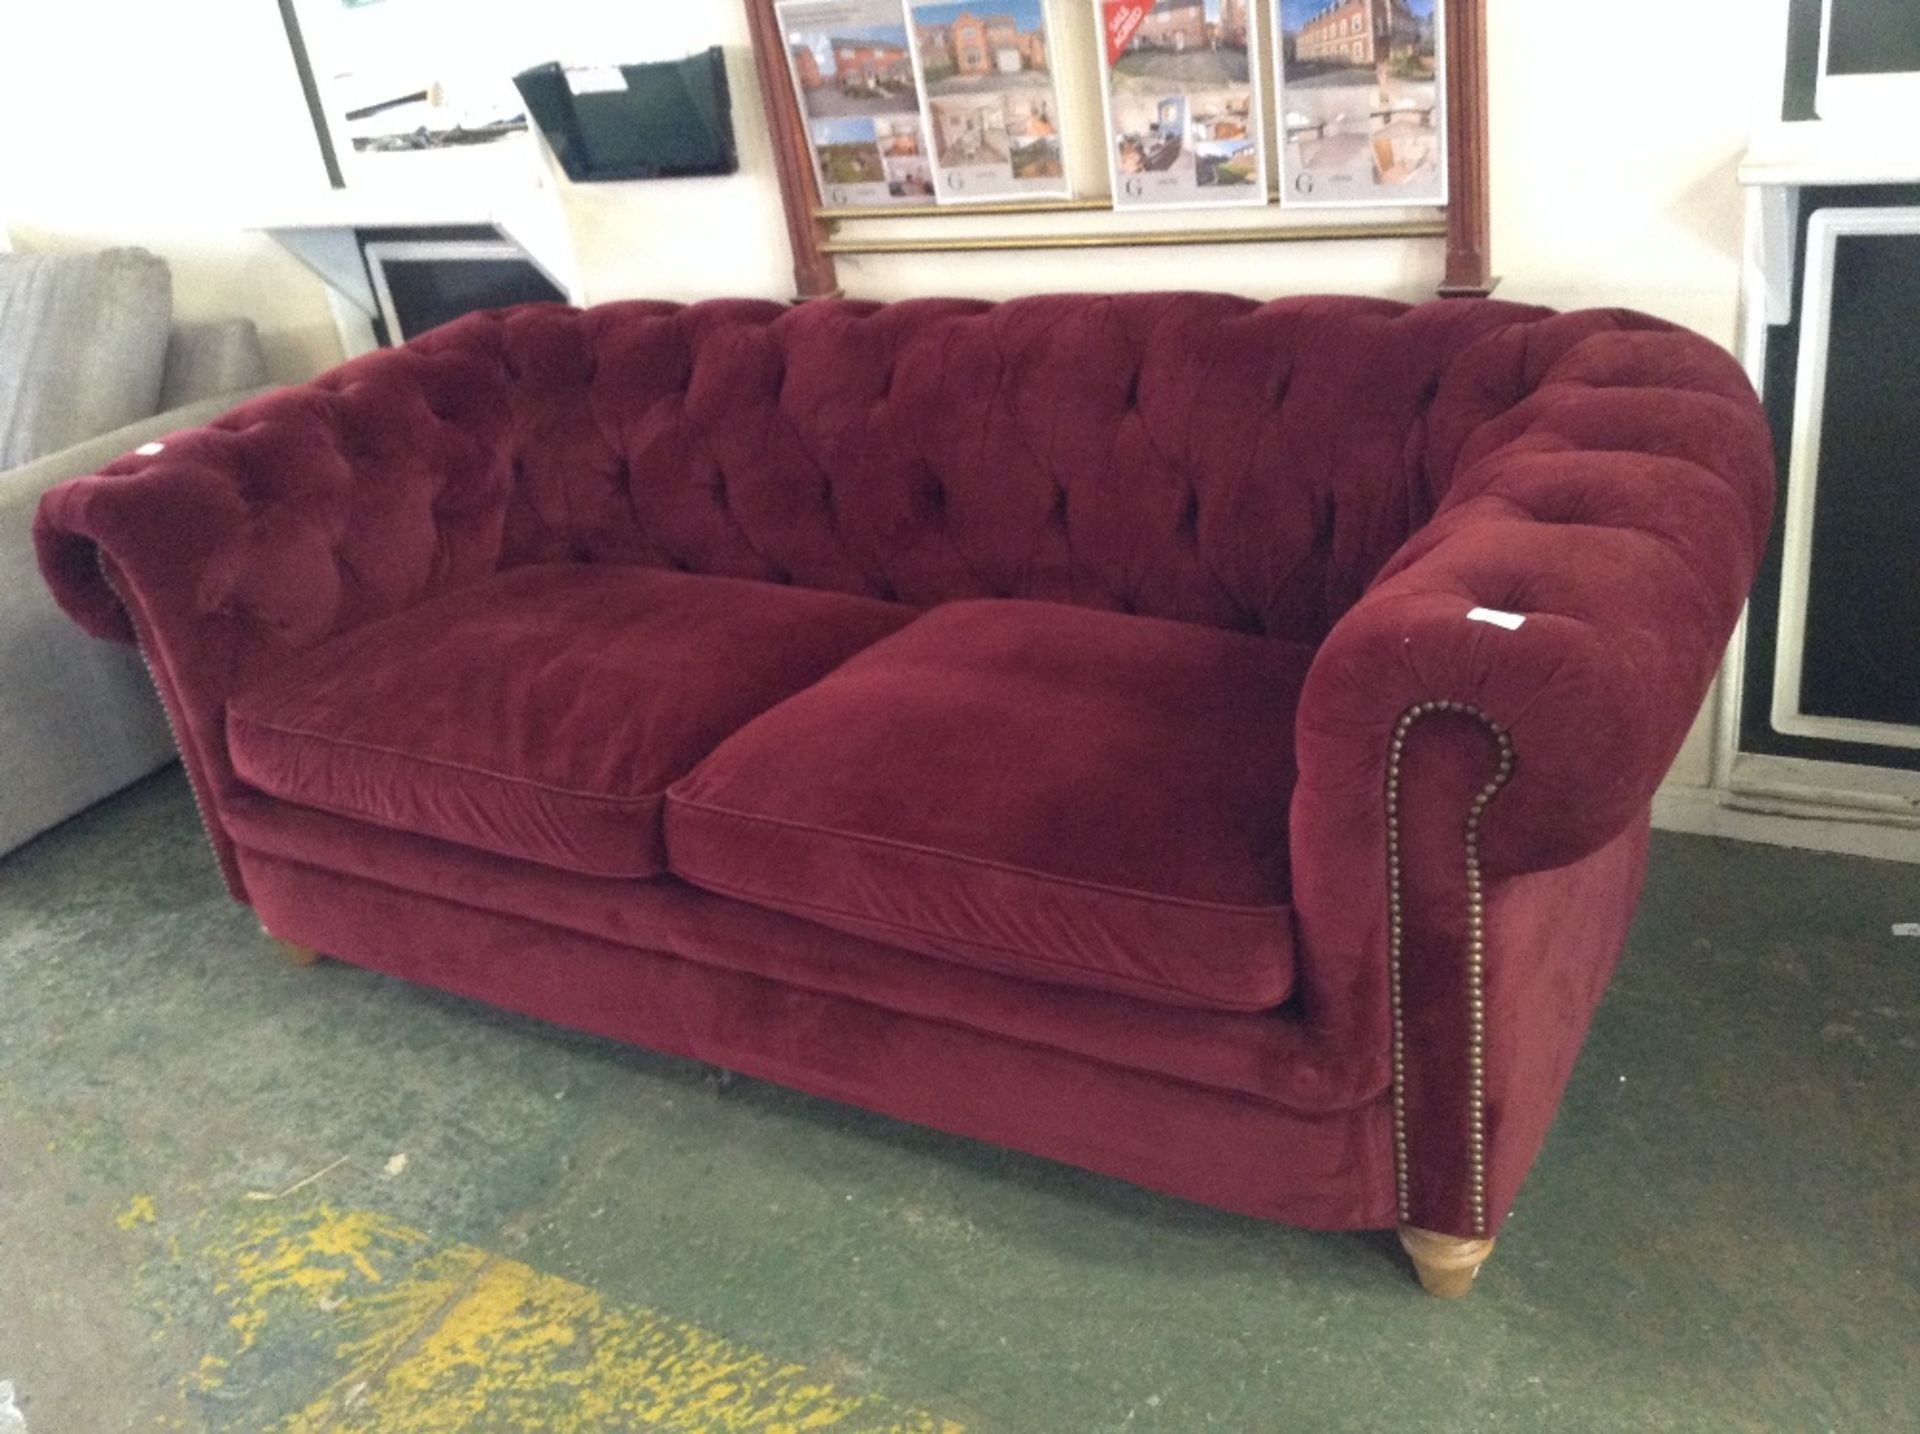 RED CHESTERFIELD 3 SEATER SOFA